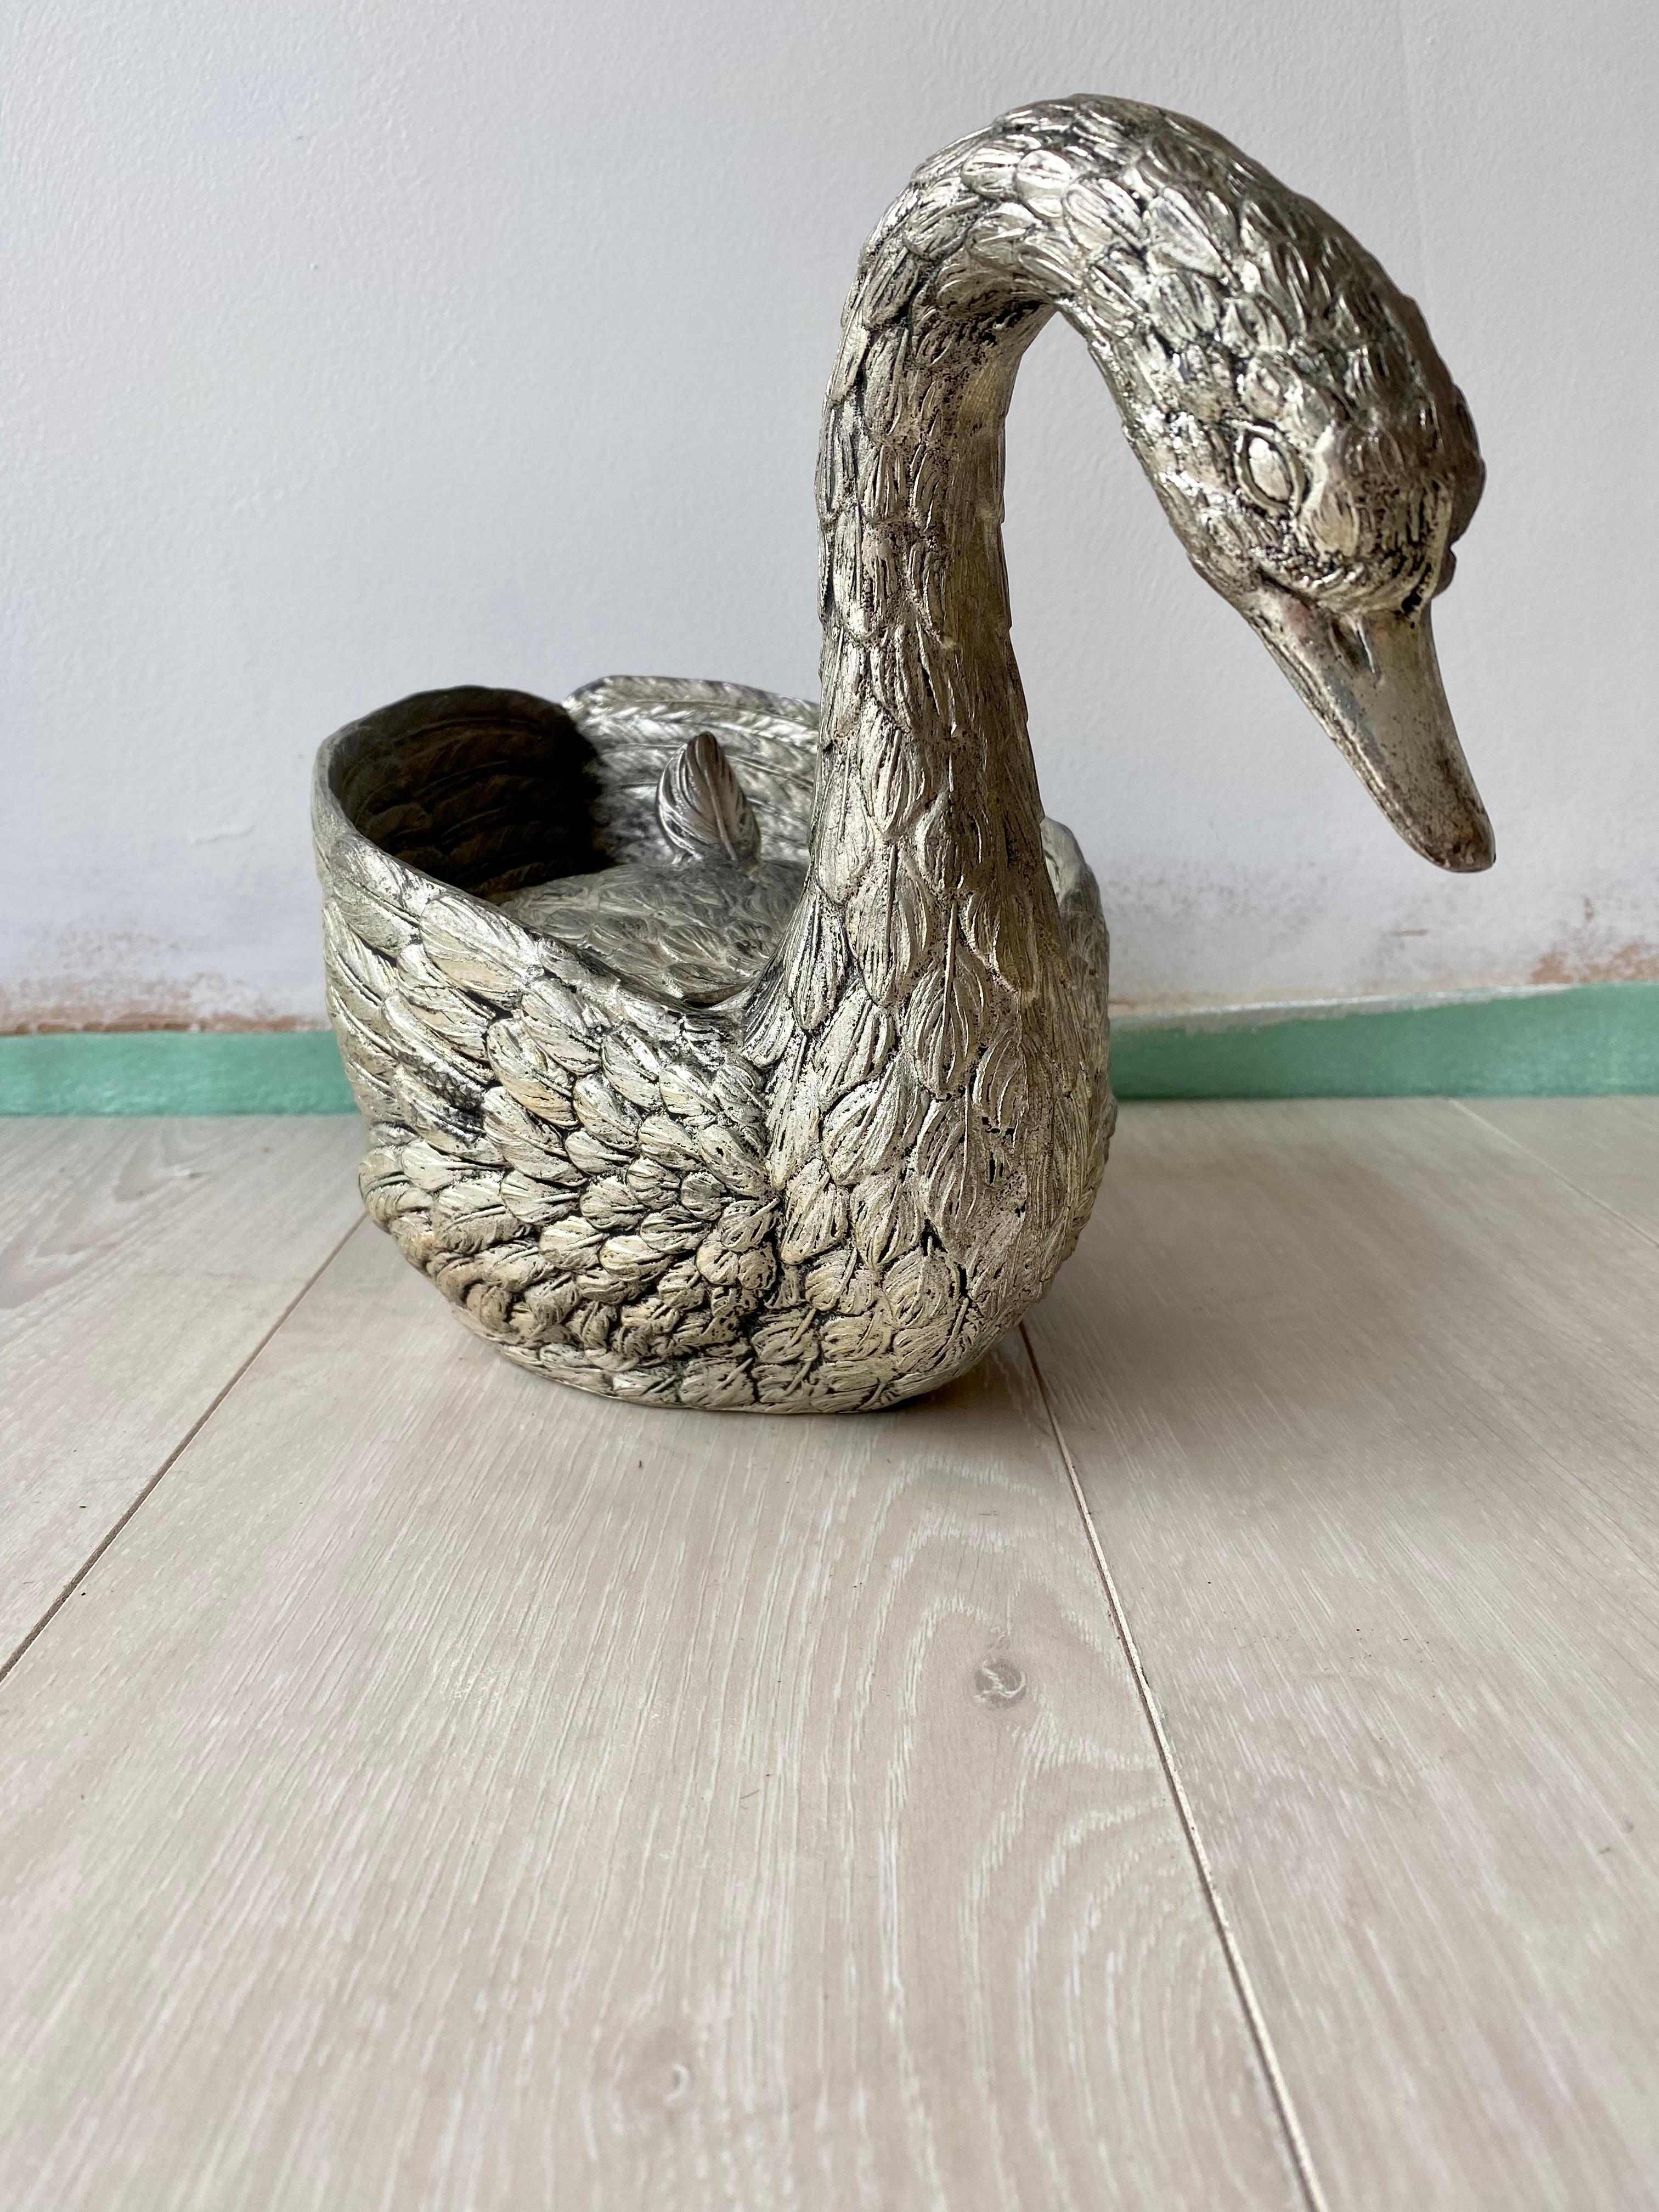 Vintage Swan Ice Bucket by Mauro Manetti In Good Condition For Sale In Crawley Down, GB